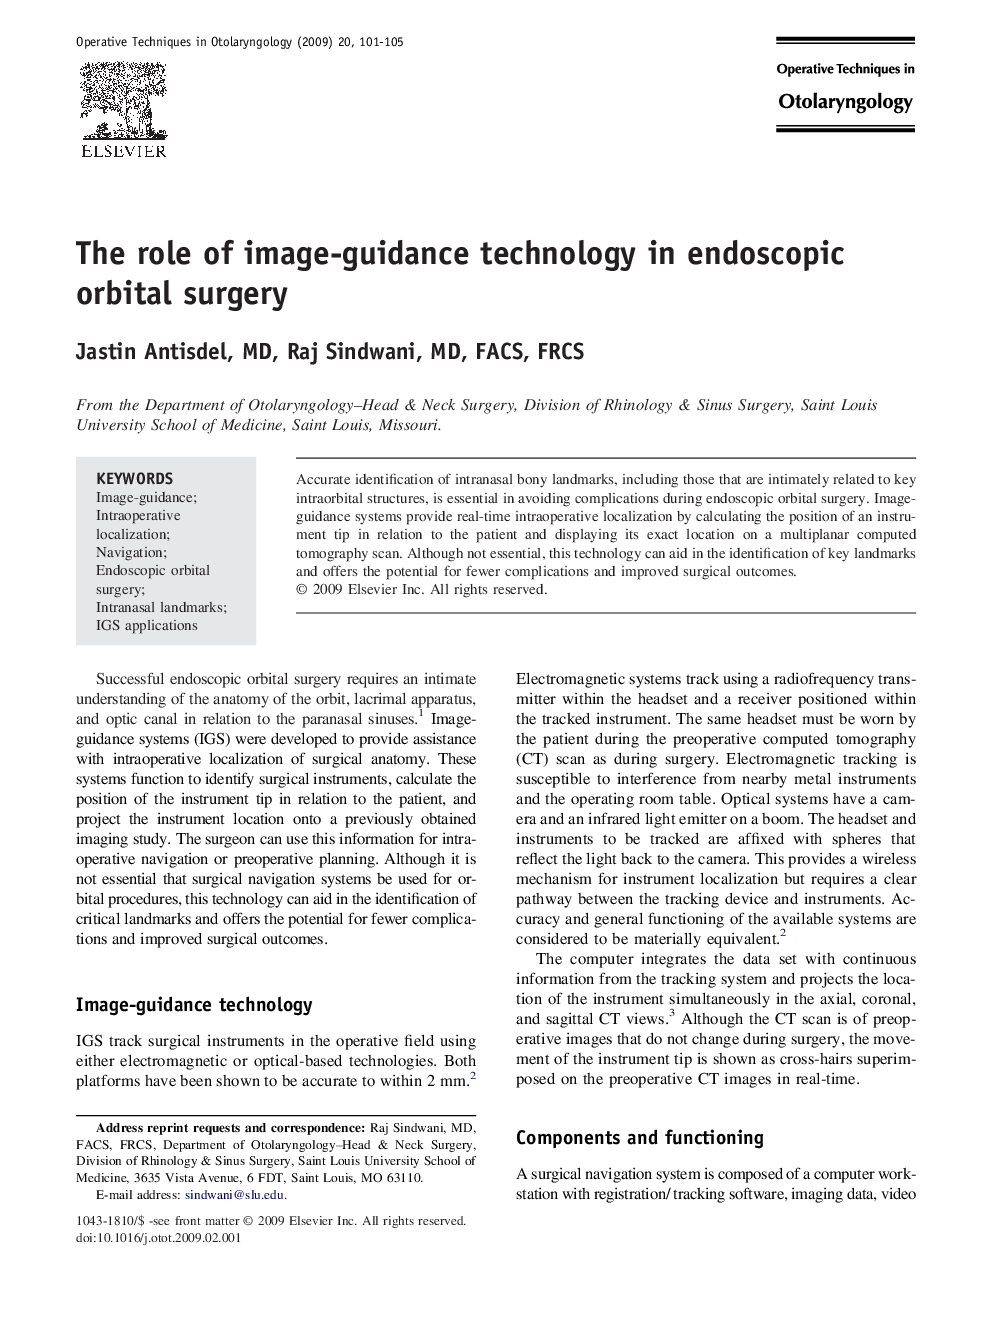 The role of image-guidance technology in endoscopic orbital surgery